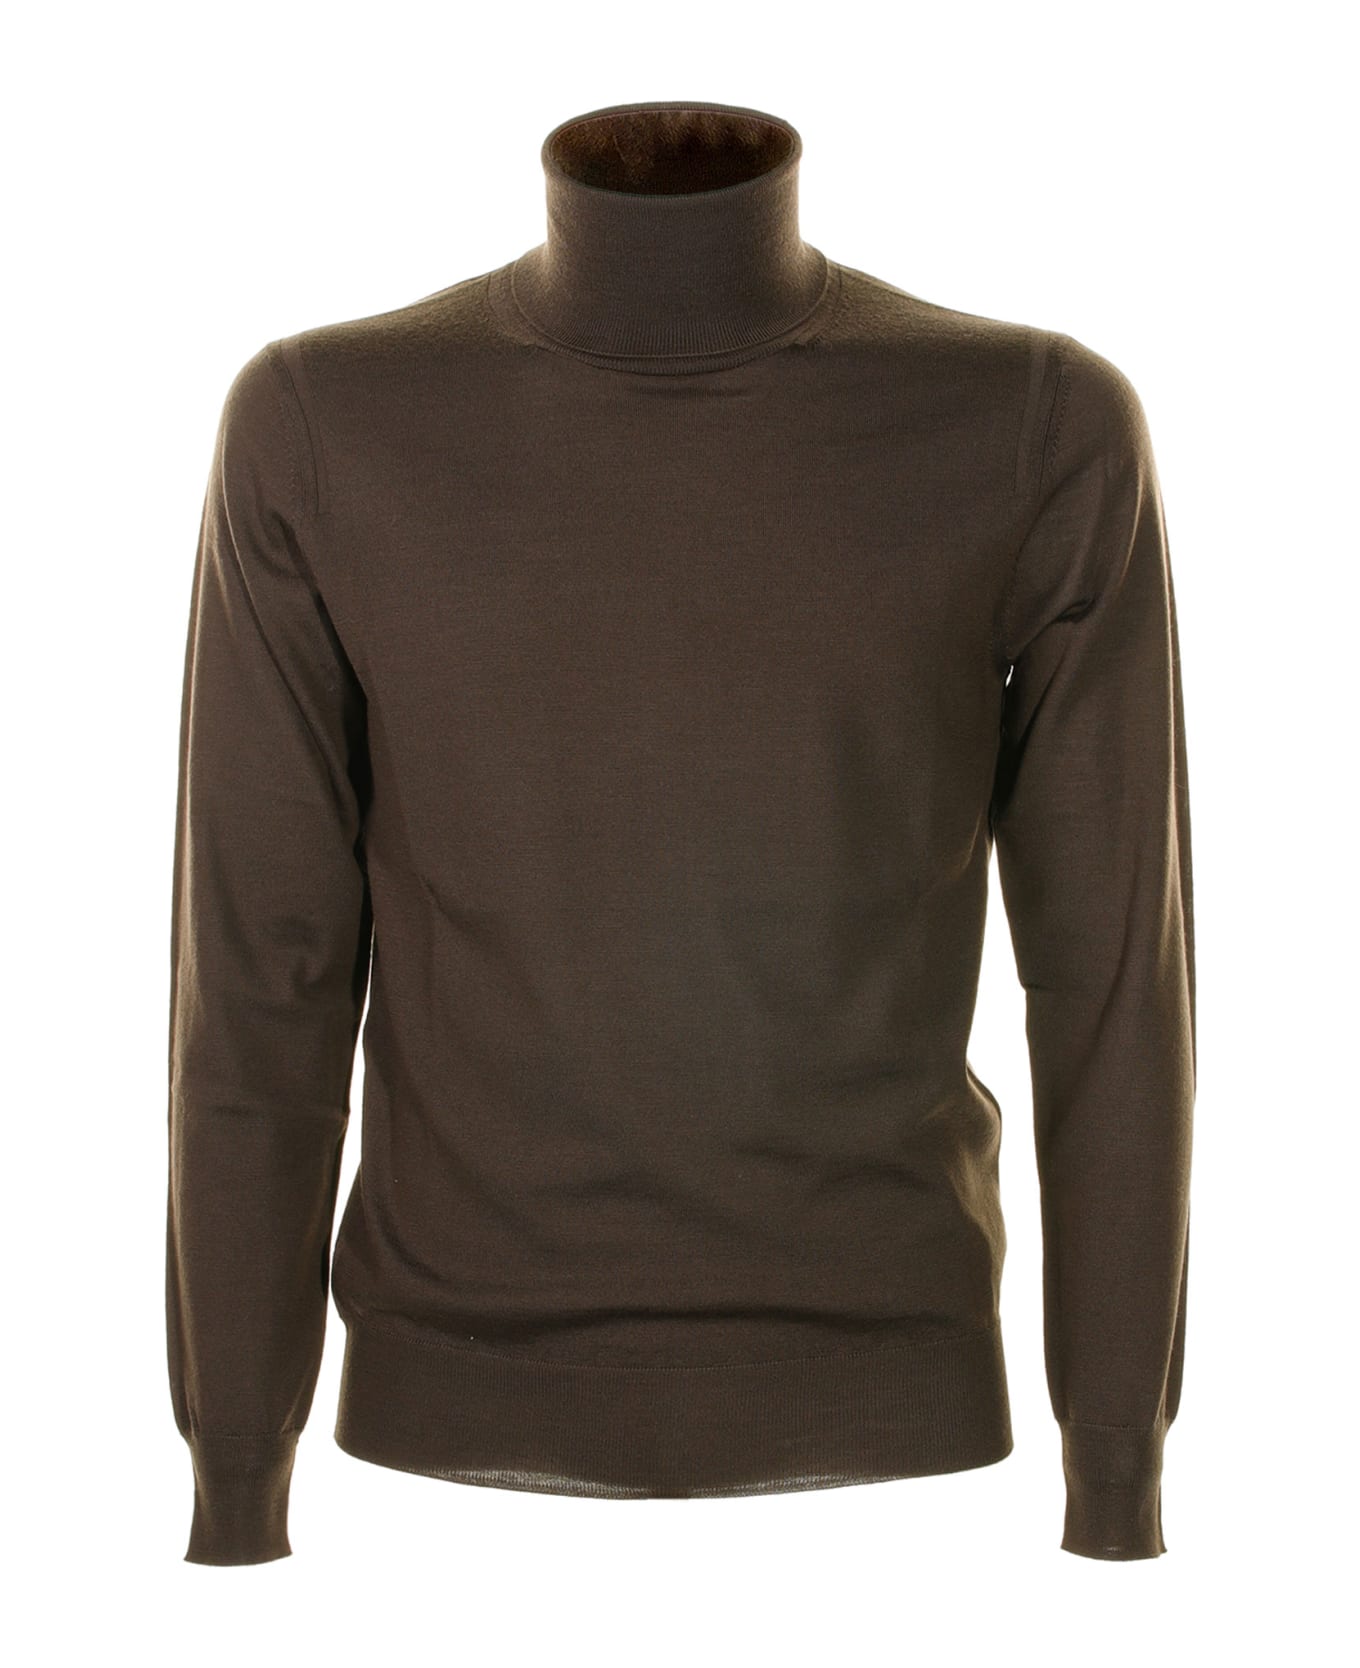 Paolo Pecora Brown Turtleneck With Long Sleeves - MARRONE